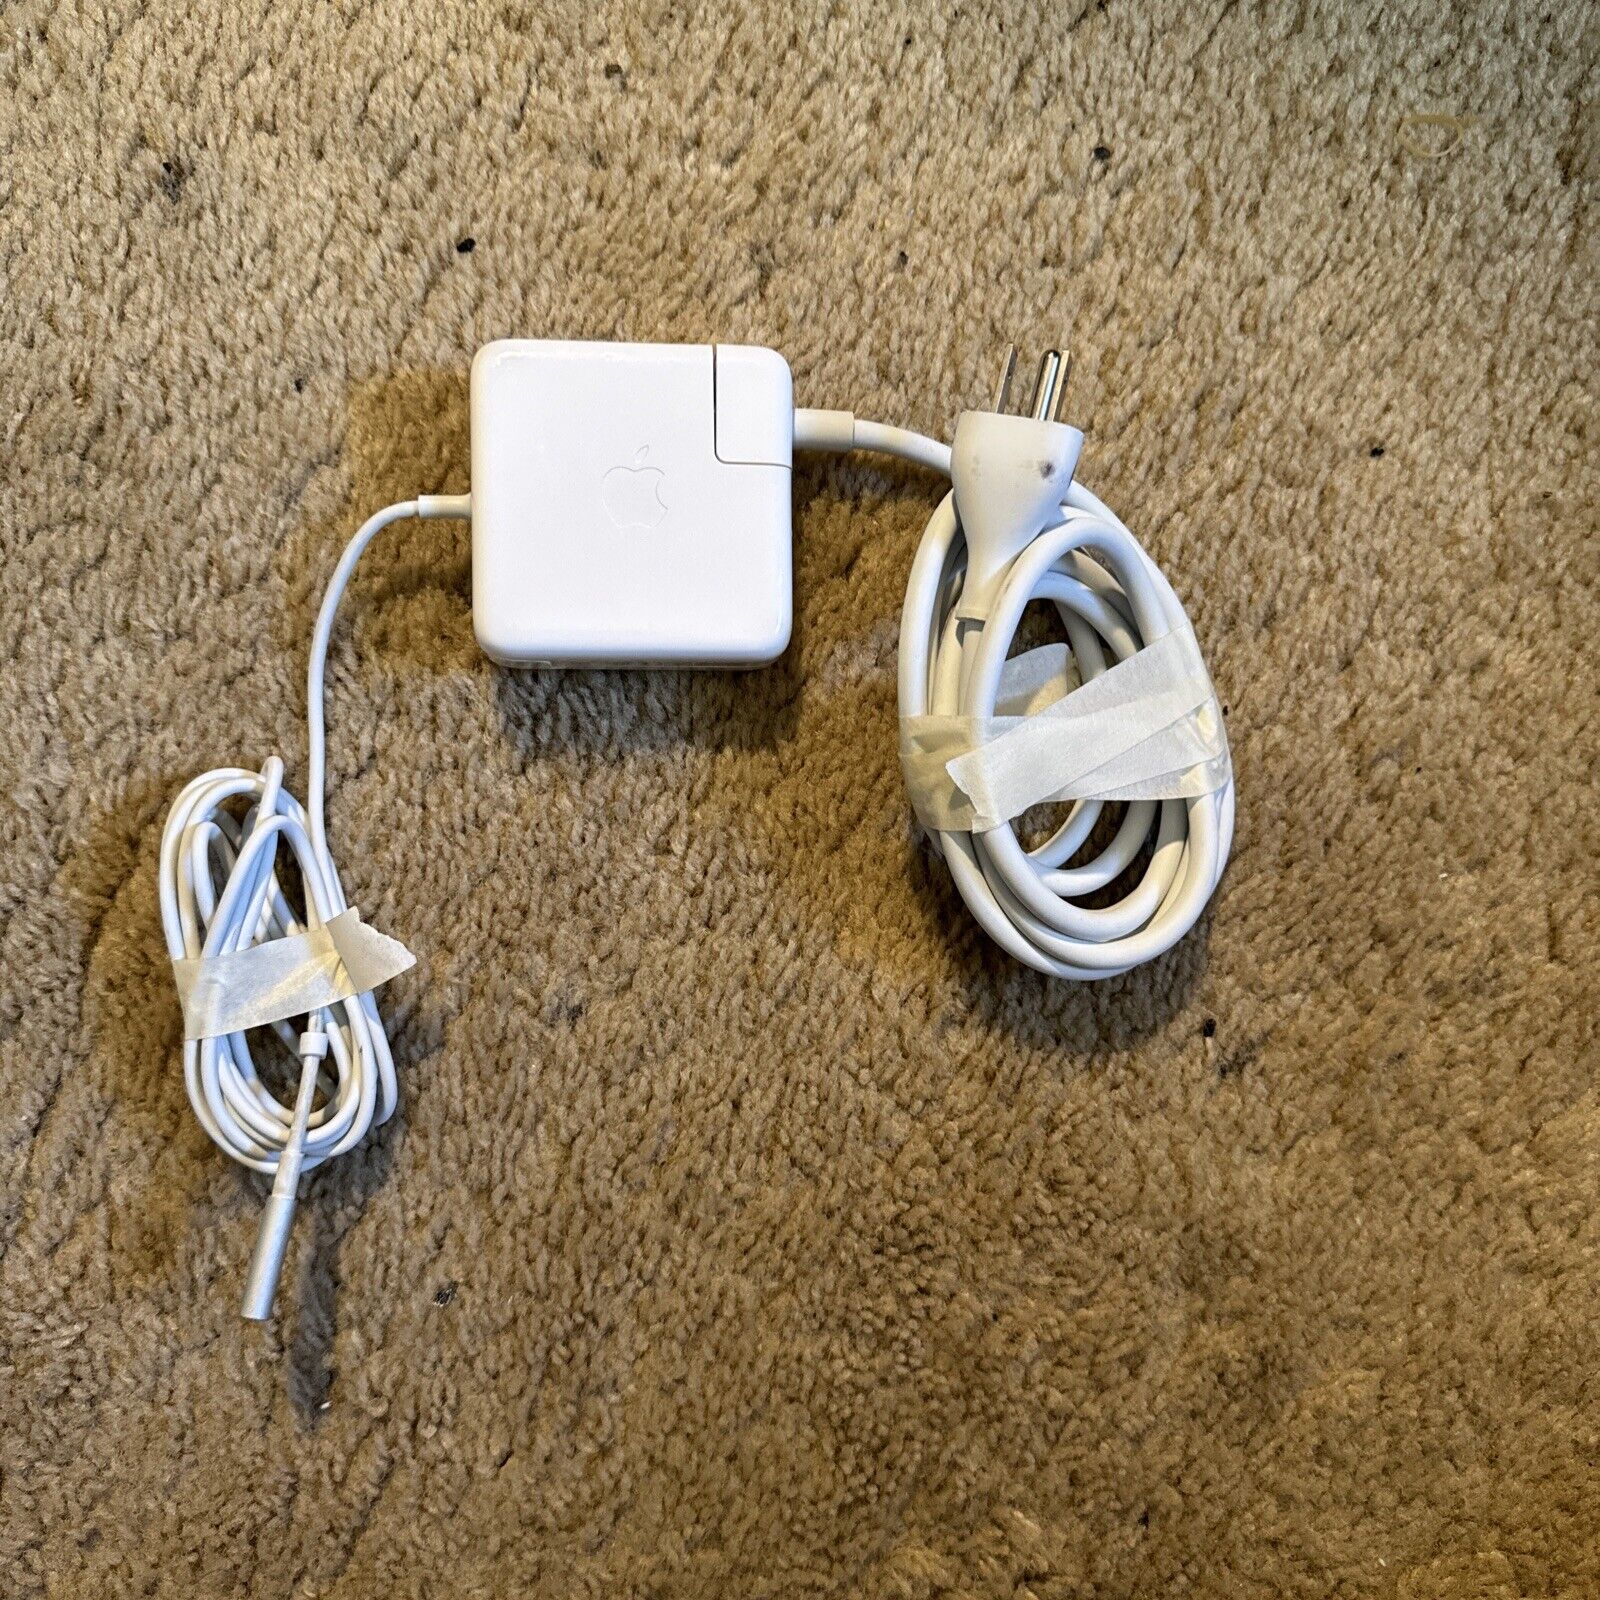 Original OEM Apple 60W Macbook Pro L Tip MagSafe Charger A1344 & Power Cord